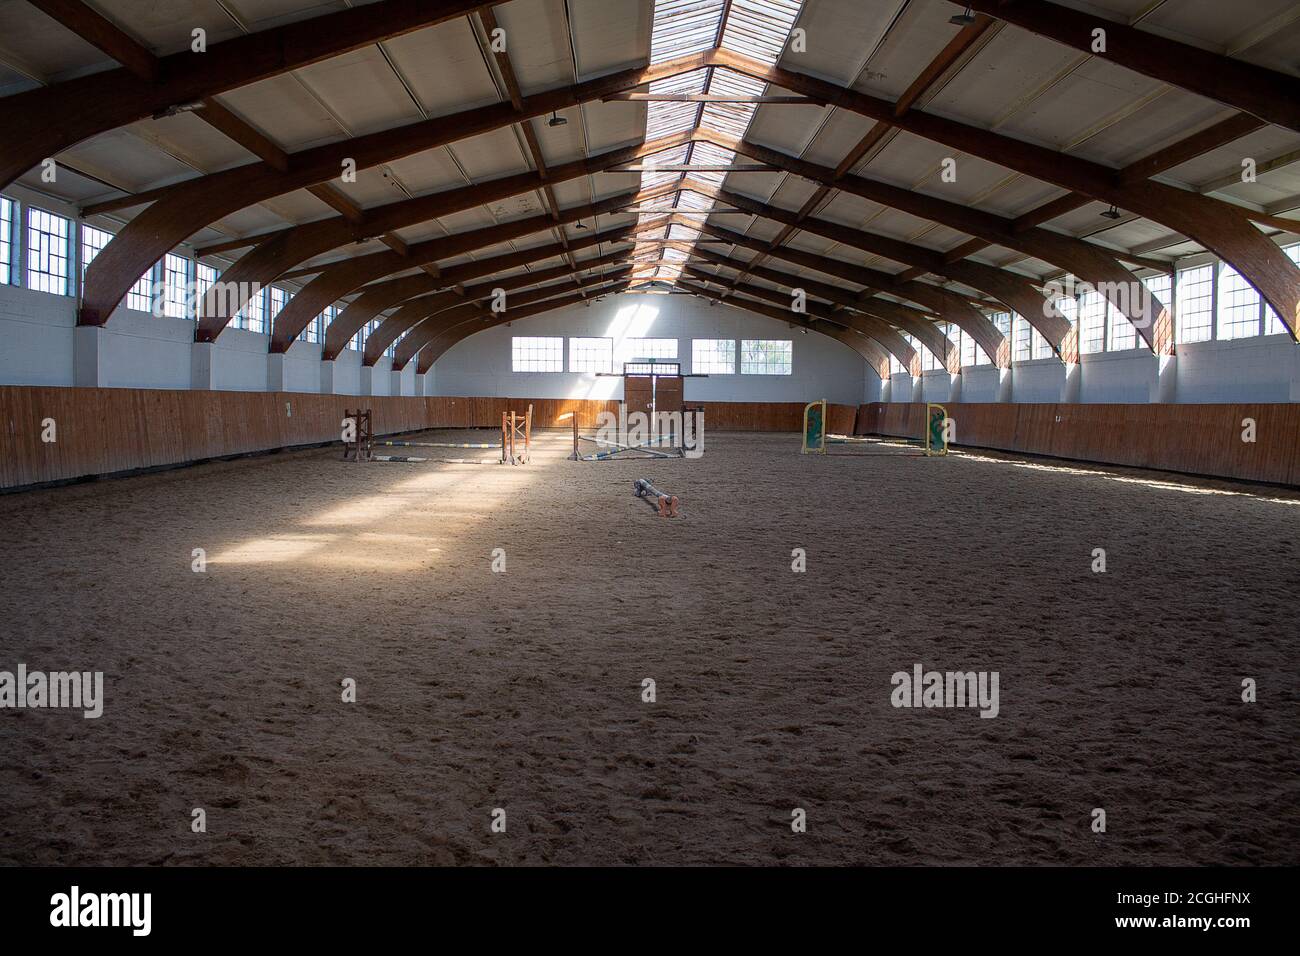 A light-flooded riding arena with some jumping obstacles. Stock Photo